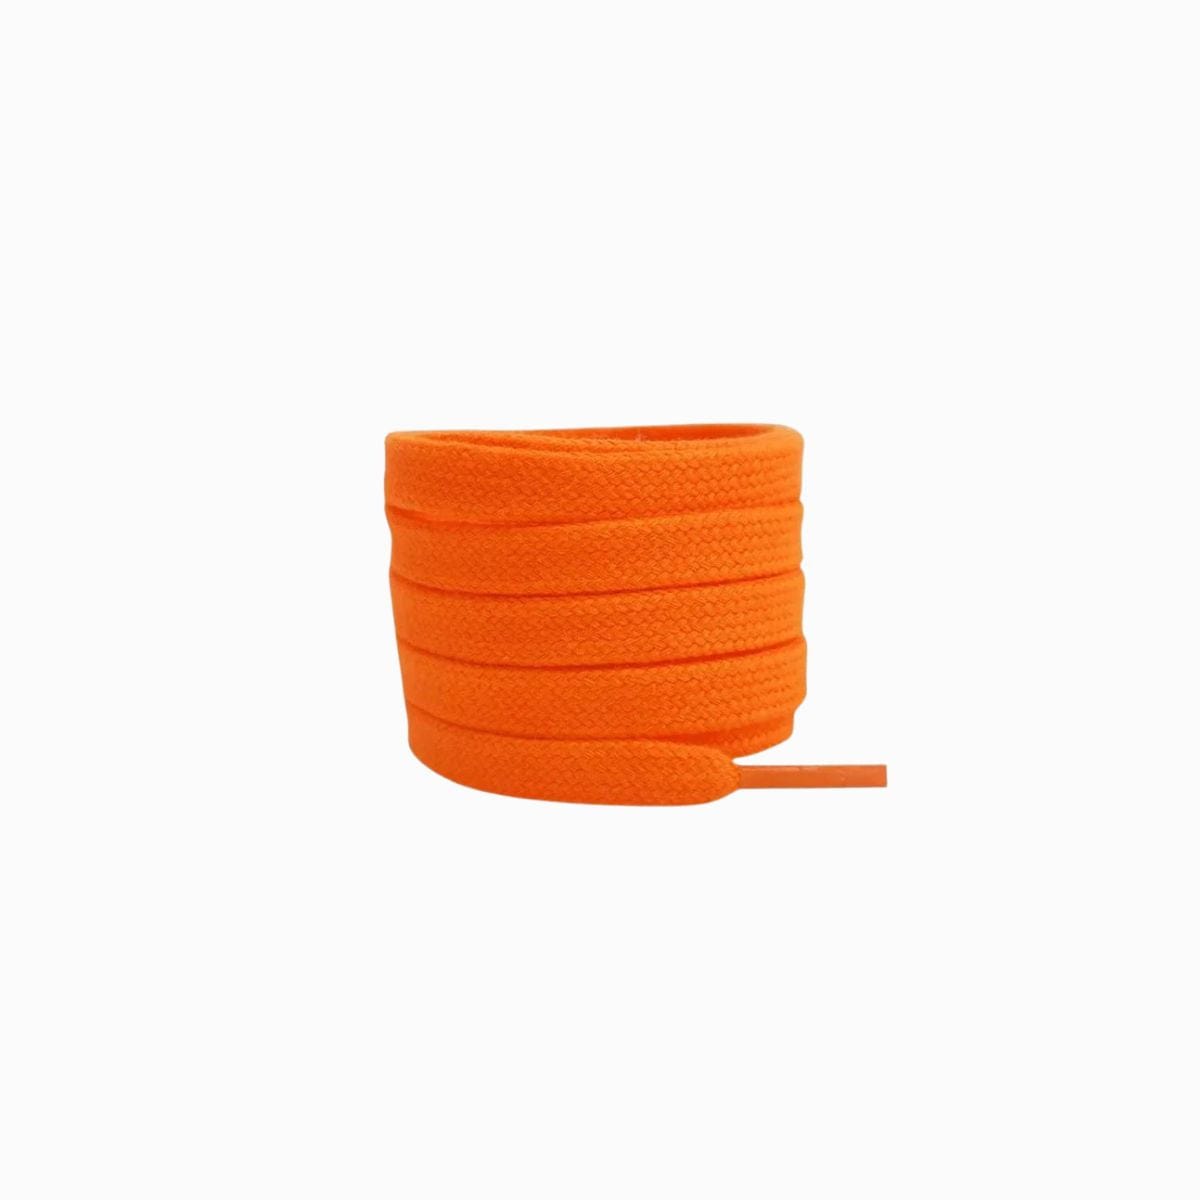 Orange Replacement Shoe Laces for Adidas Samba Sneakers by Kicks Shoelaces